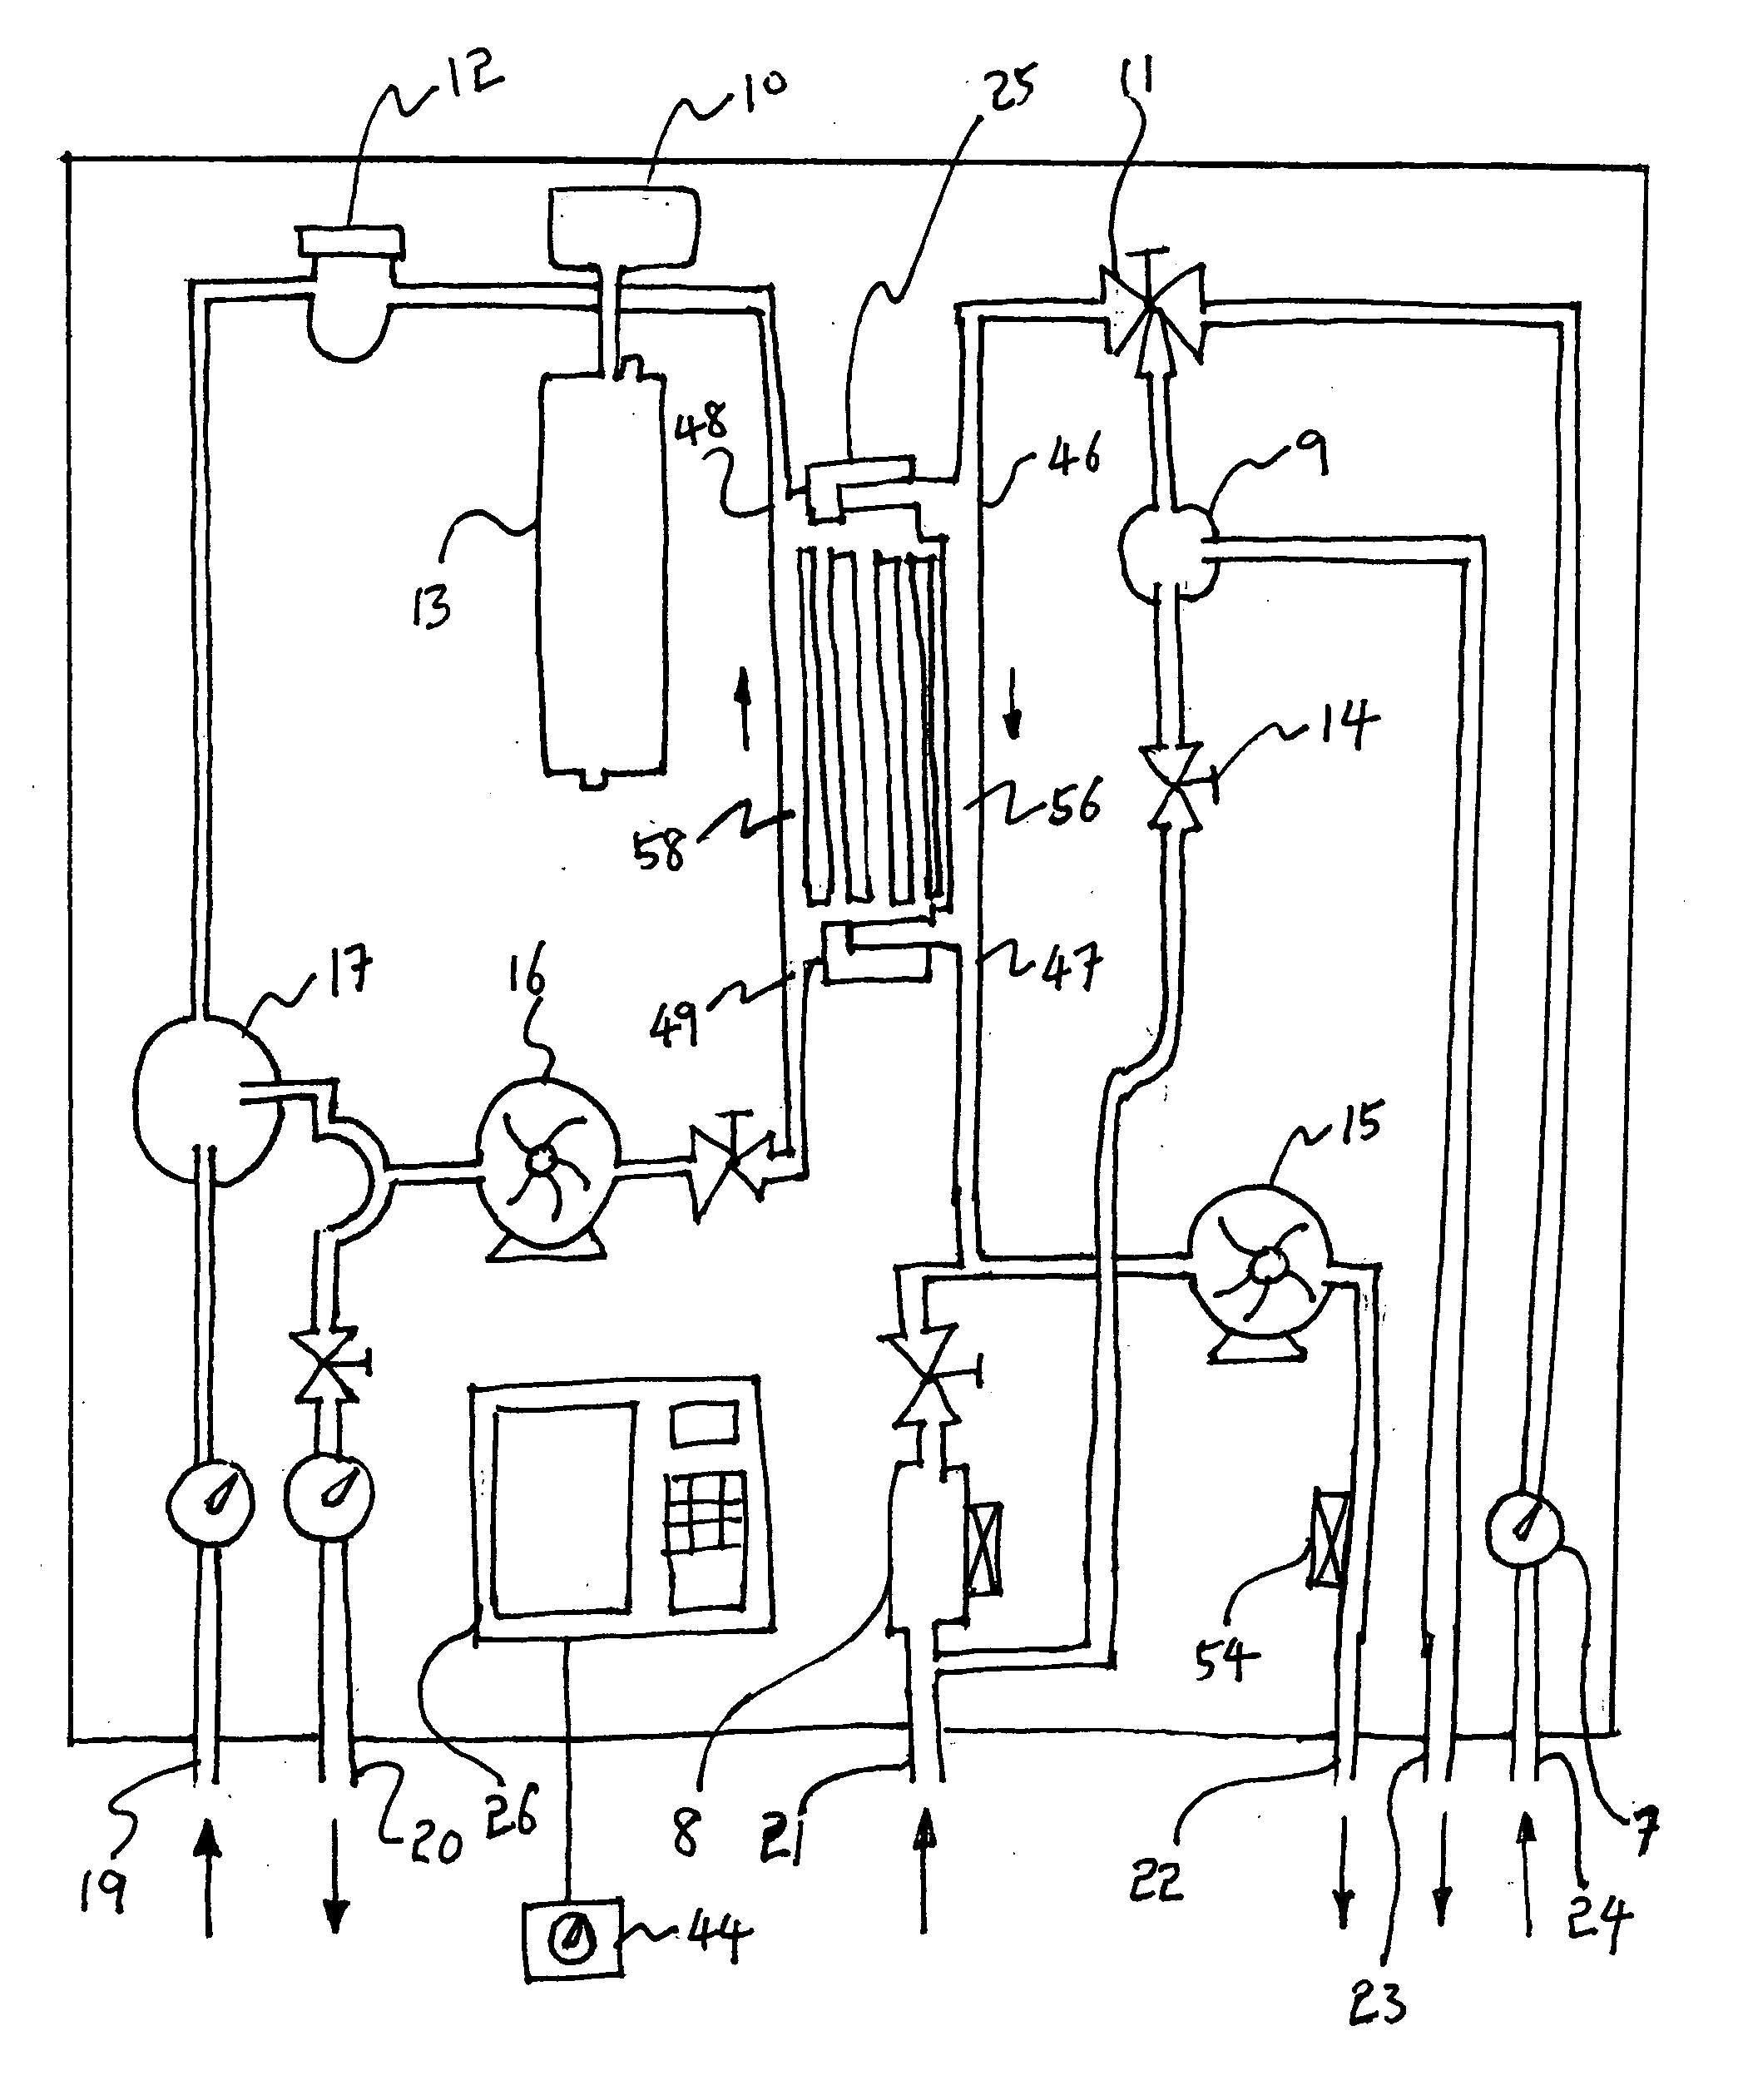 Heated fluid distribution apparatus for combined domestic hot water supply and space heating system in closed loop